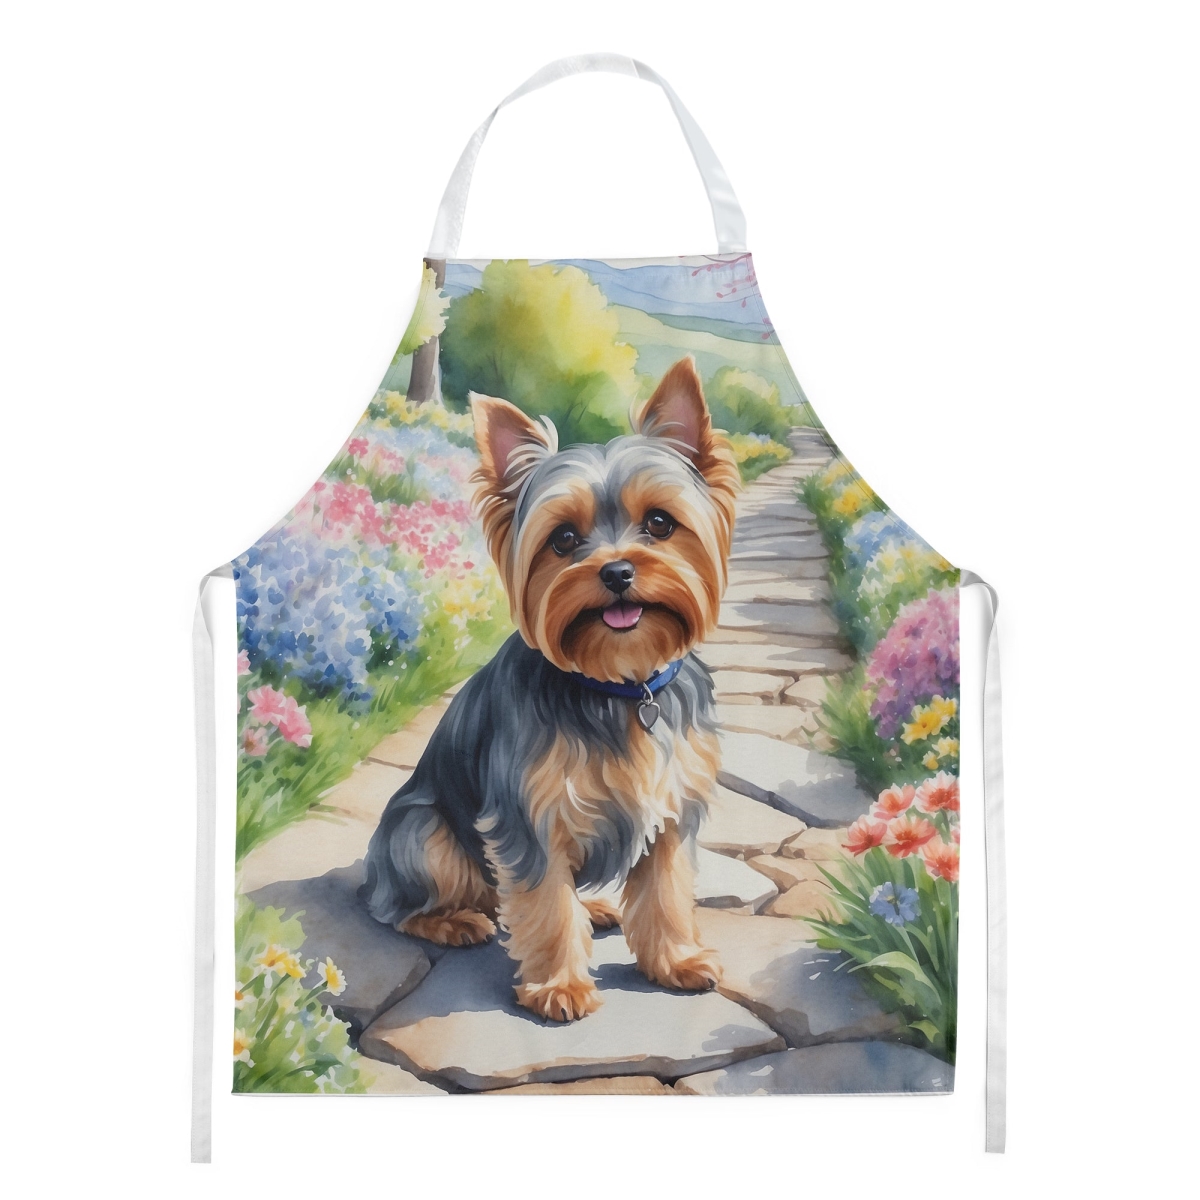 Picture of Carolines Treasures DAC6735APRON 30 x 27 in. Yorkshire Terrier Spring Path Apron